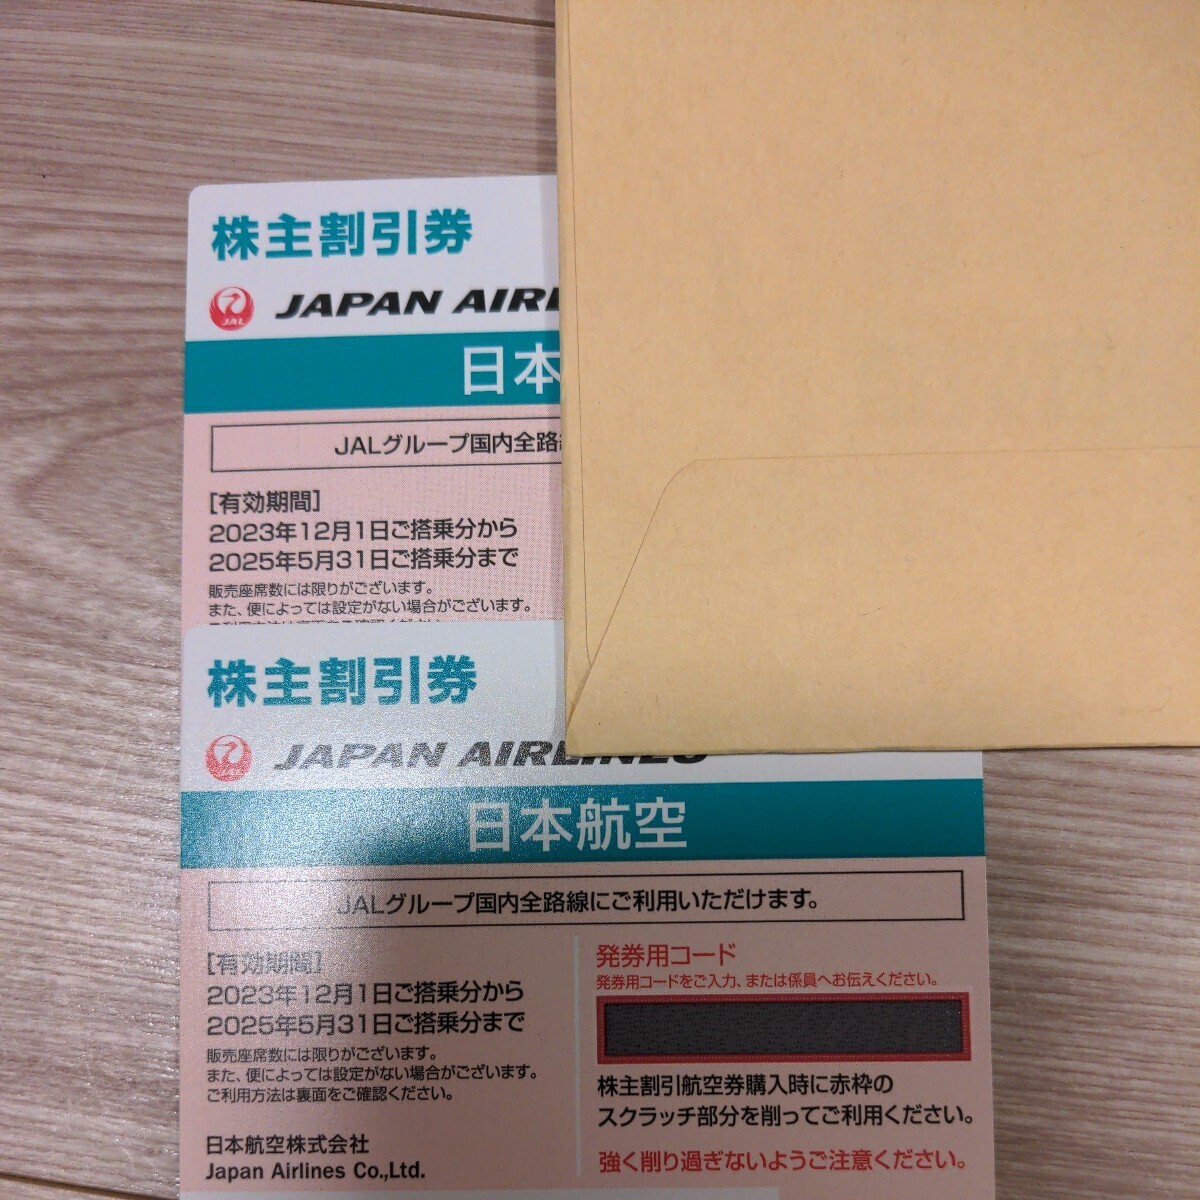 JAL Japan Air Lines stockholder hospitality 2 sheets [ free shipping ]( have efficacy time limit 2025 year 5 month 31 day )